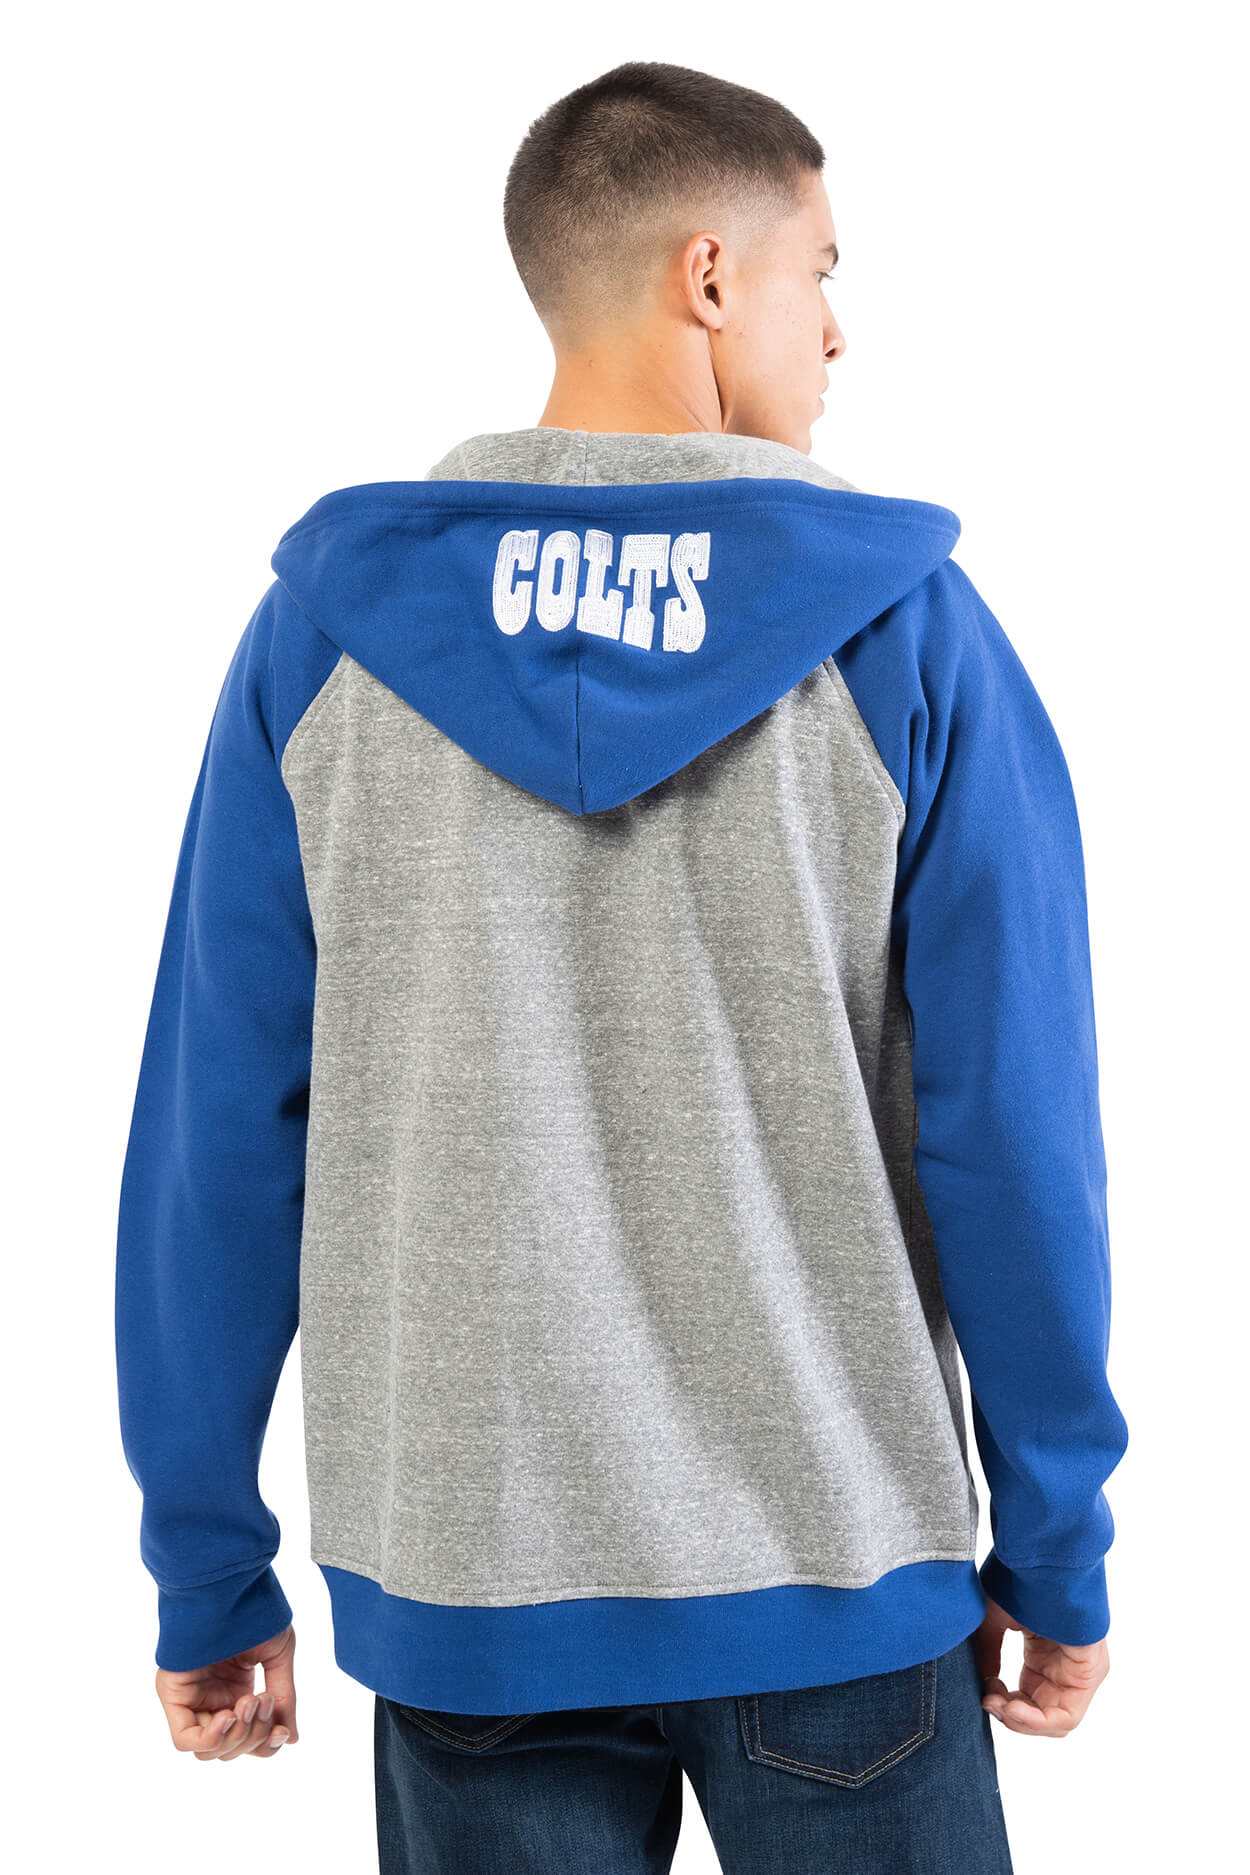 NFL Indianapolis Colts Men's Full Zip Hoodie|Indianapolis Colts